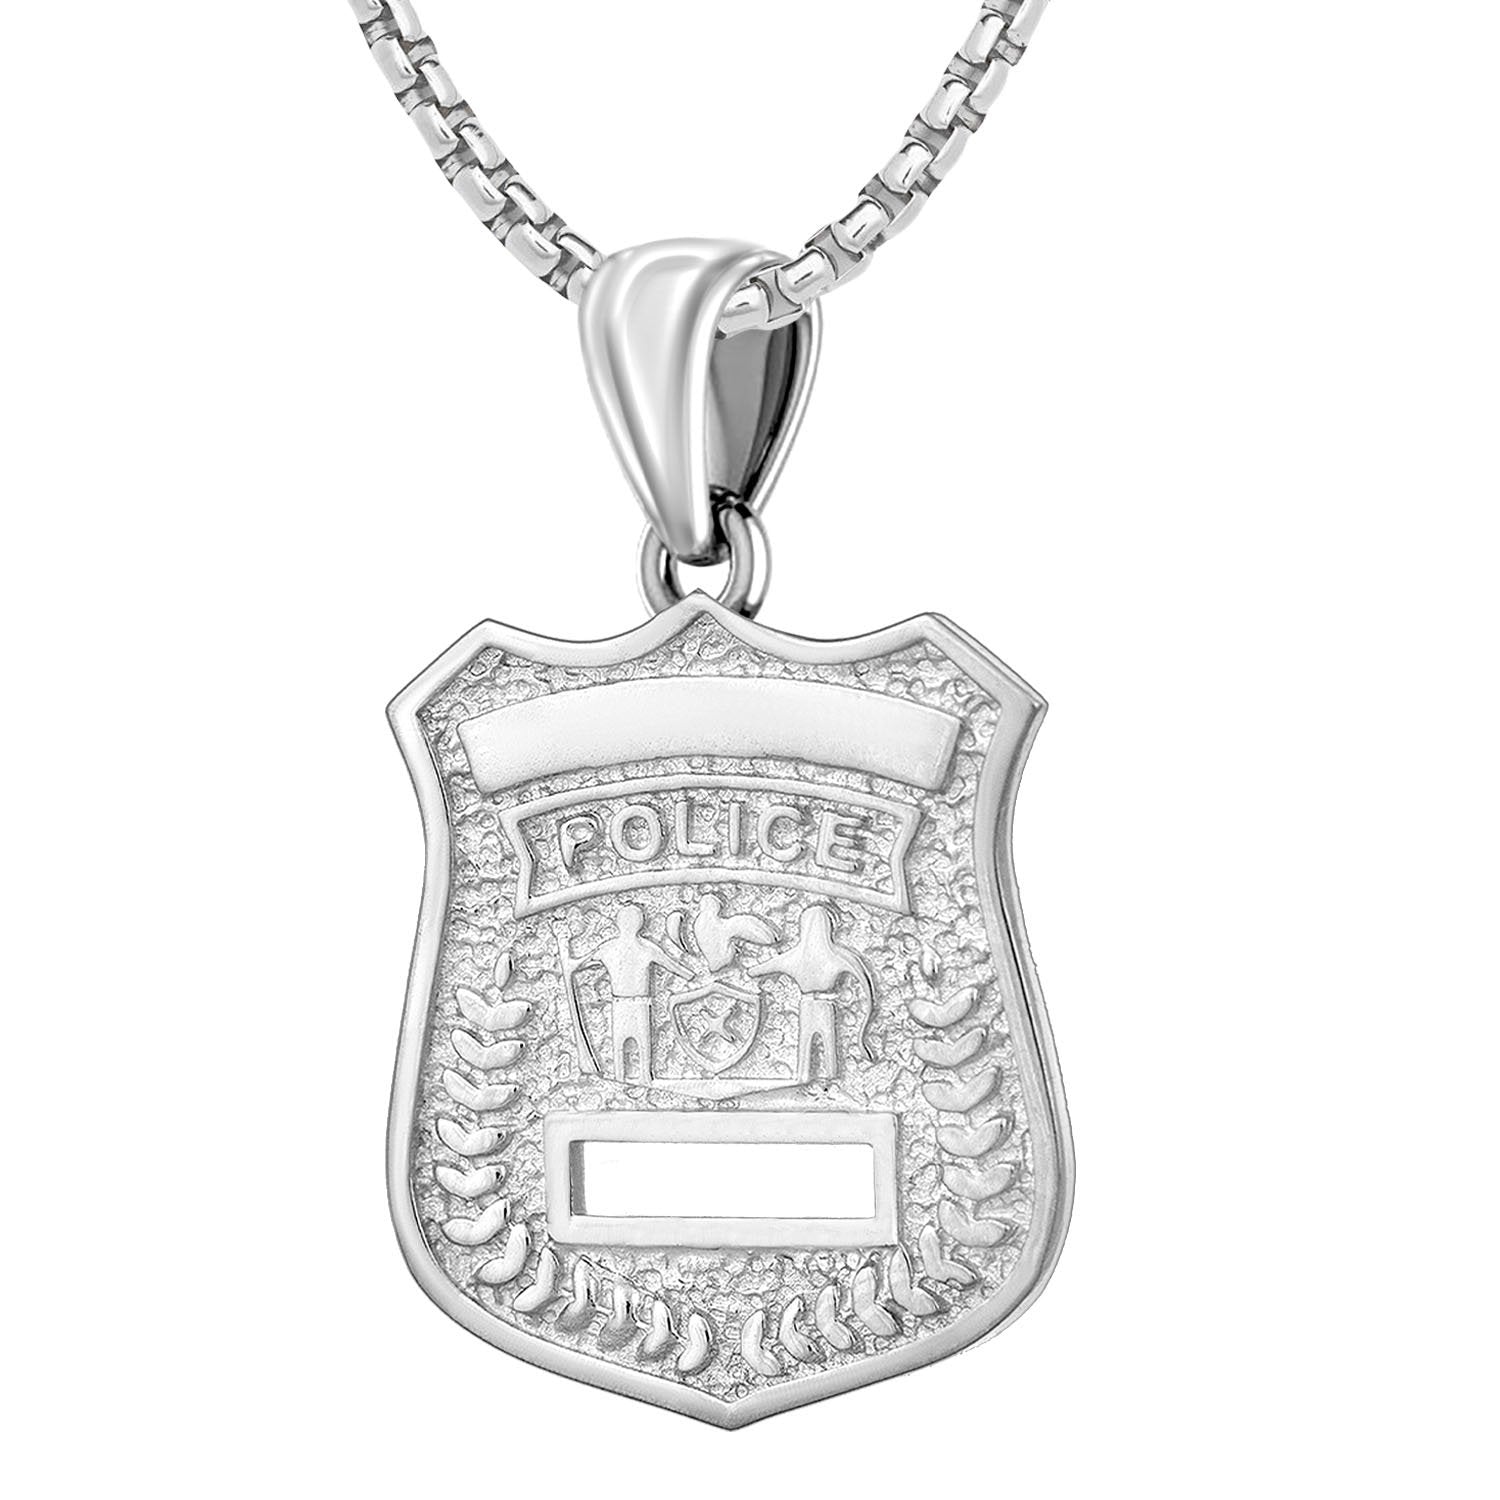 Police Badge Necklace - Sterling Silver Pendant of 22mm with chain